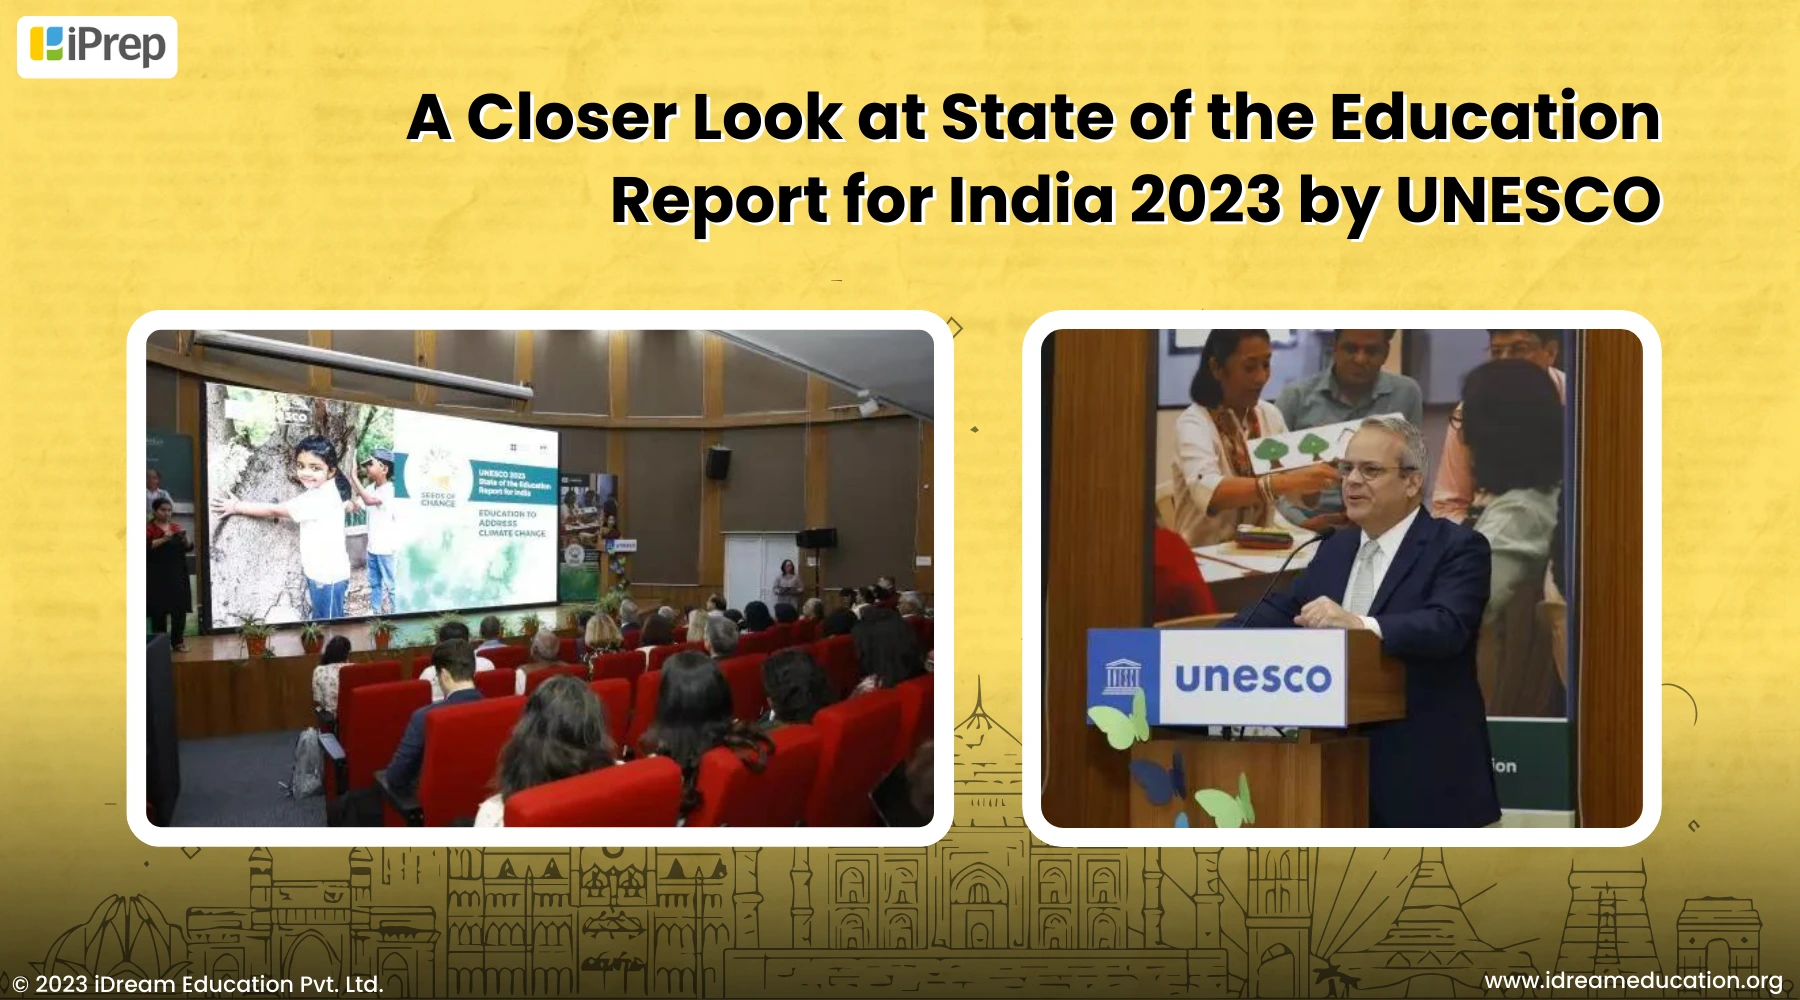 Cover image for the 'State of the Education Report for India 2023' by UNESCO, providing a detailed examination of how the education system in India can effectively address climate change.